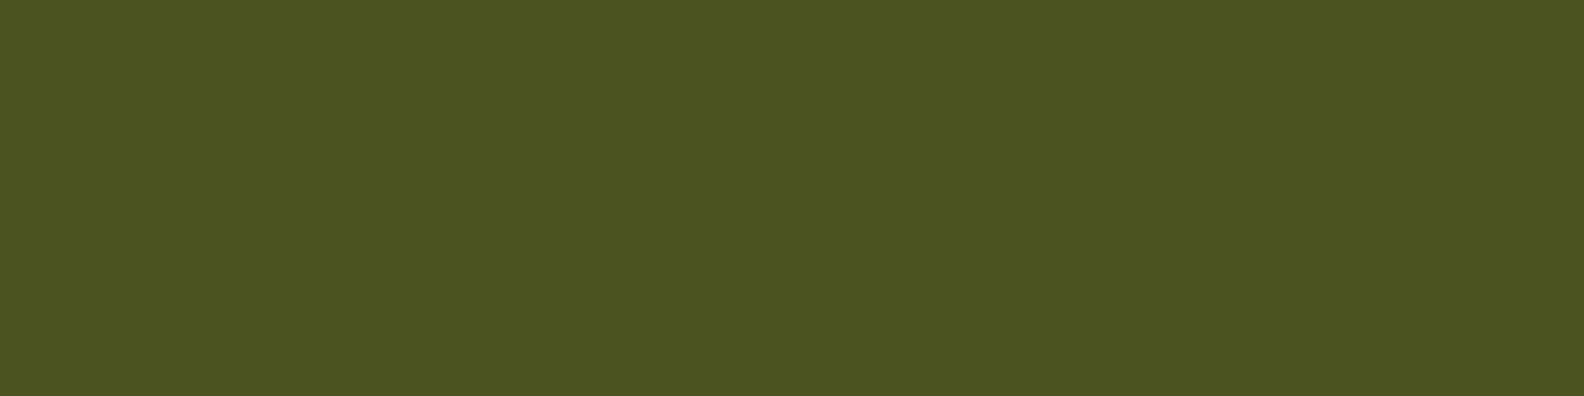 1584x396 Army Green Solid Color Background